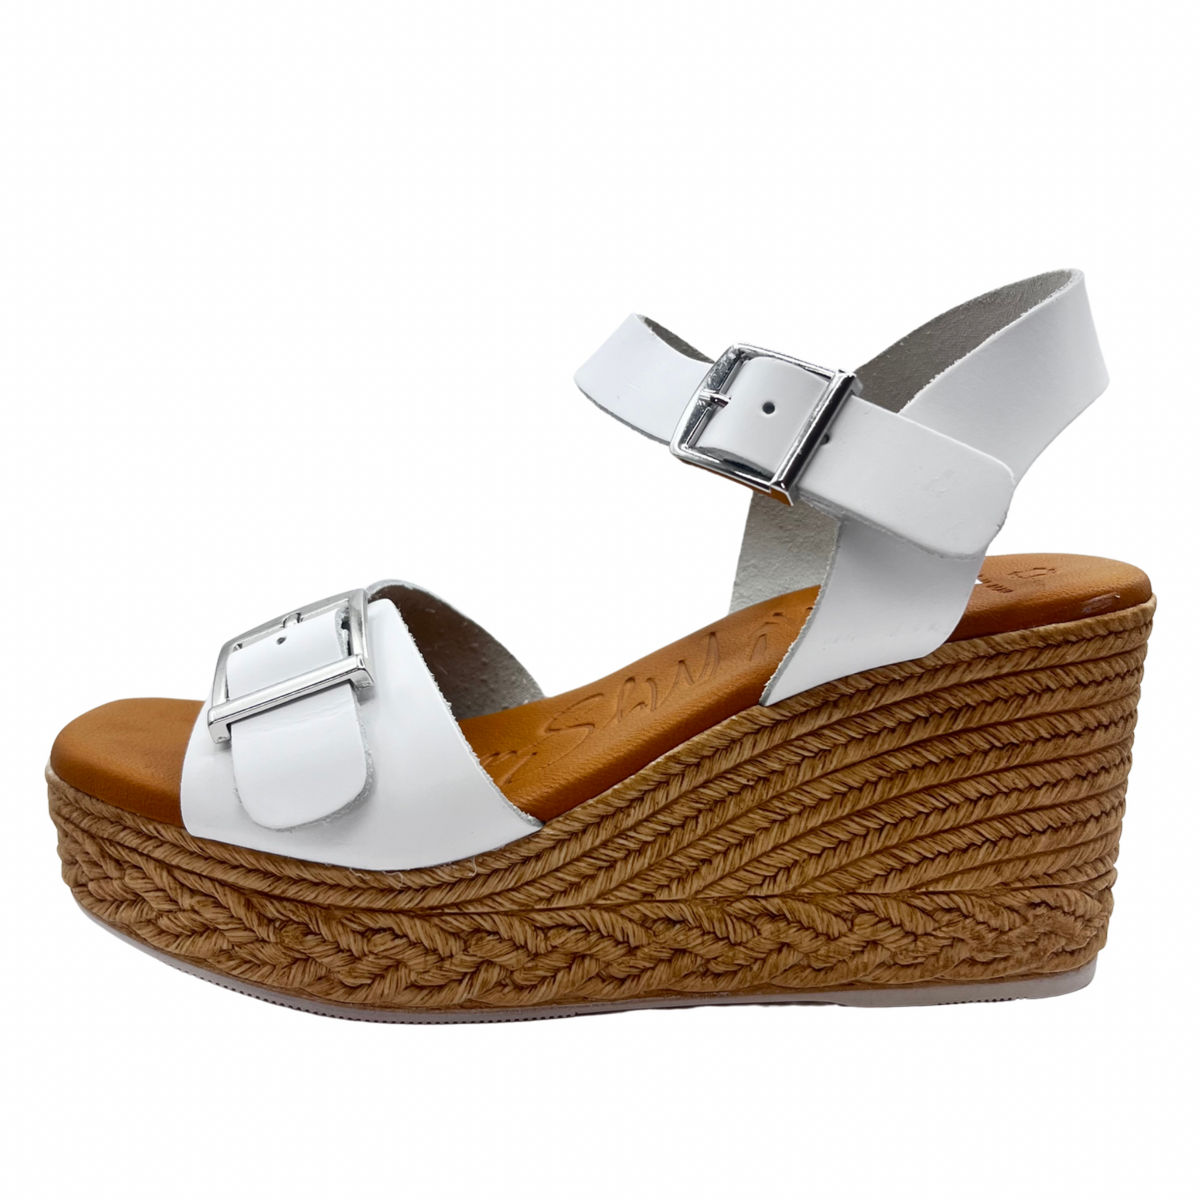 Oh My Sandals Woven Wedge White Leather Sandal